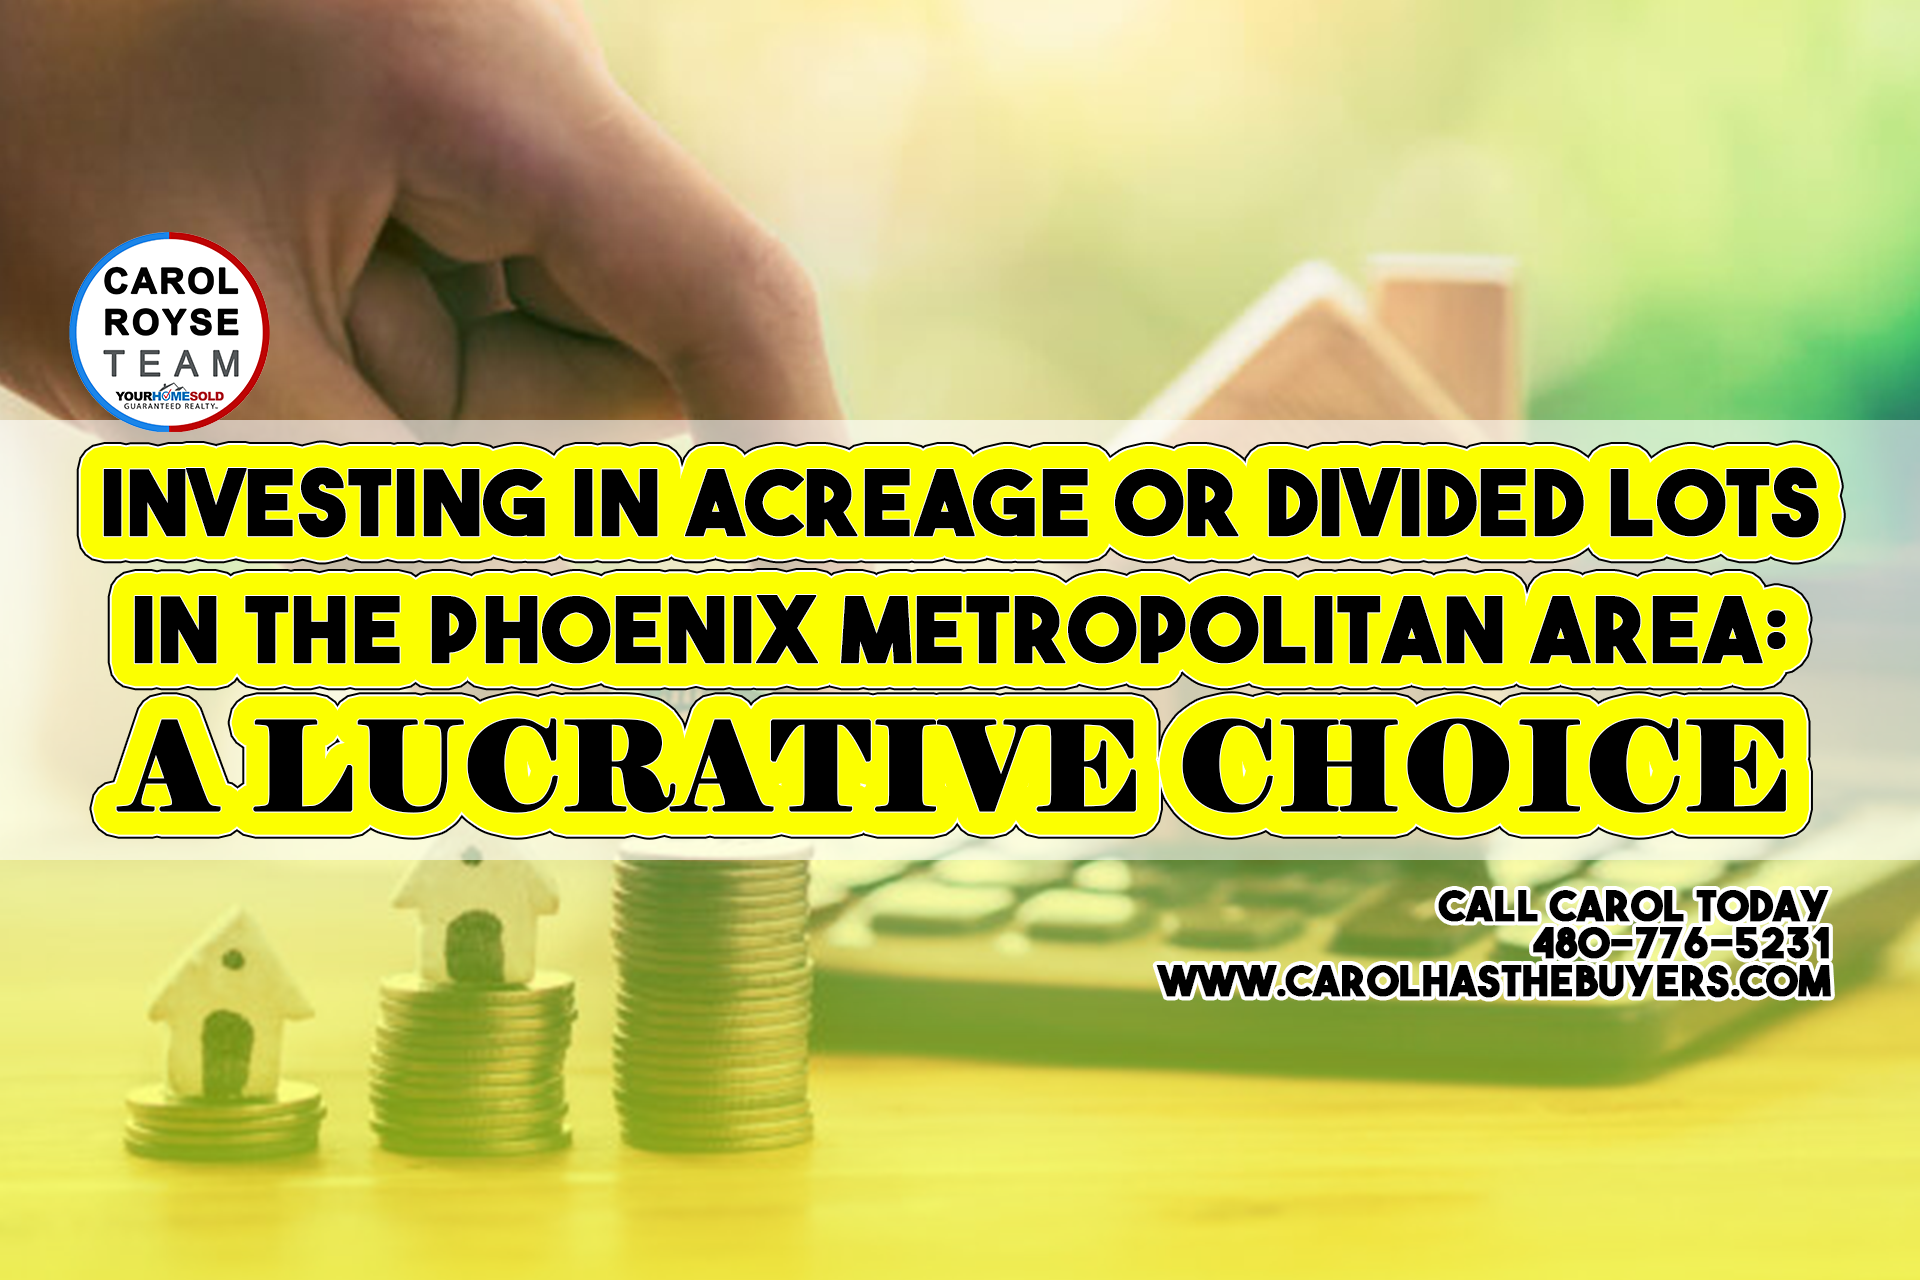 Investing in Acreage or Divided Lots in the Phoenix Metropolitan Area: A Lucrative Choice